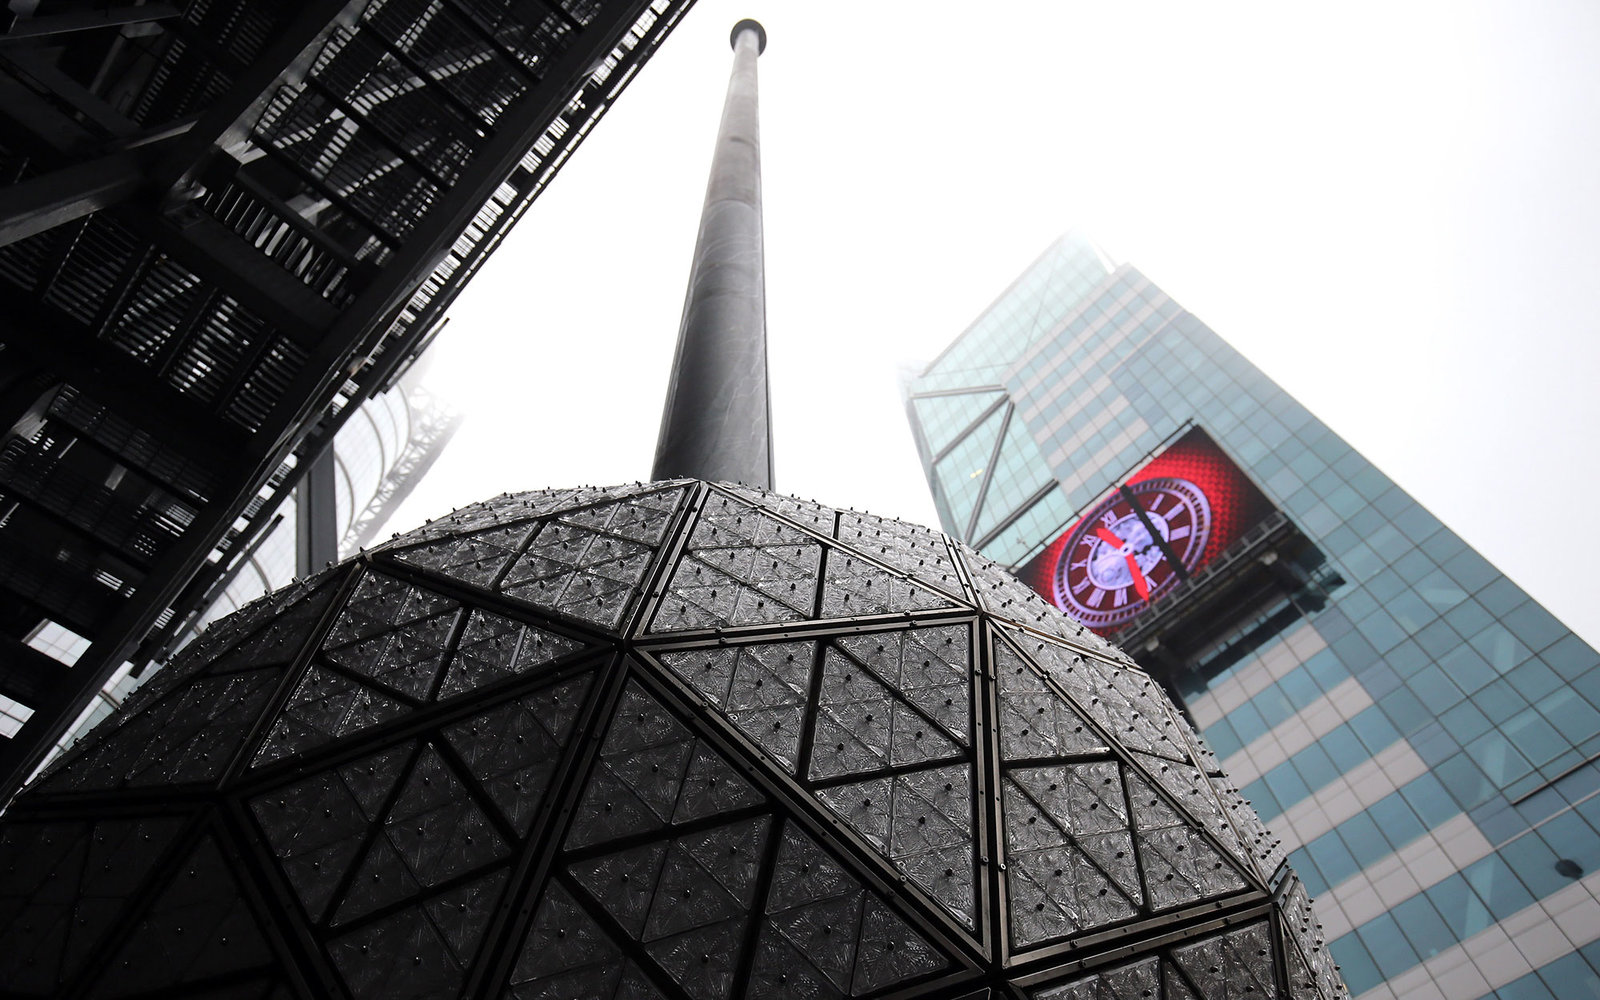 NEW YORK, NY - DECEMBER 27:  A general view of the Times Square New Year's Eve Ball during the installation of 288 new Waterford crystals on the Times Square New Year's Eve Ball at Times Square on December 27, 2015 in New York City.  (Photo by Neilson Bar